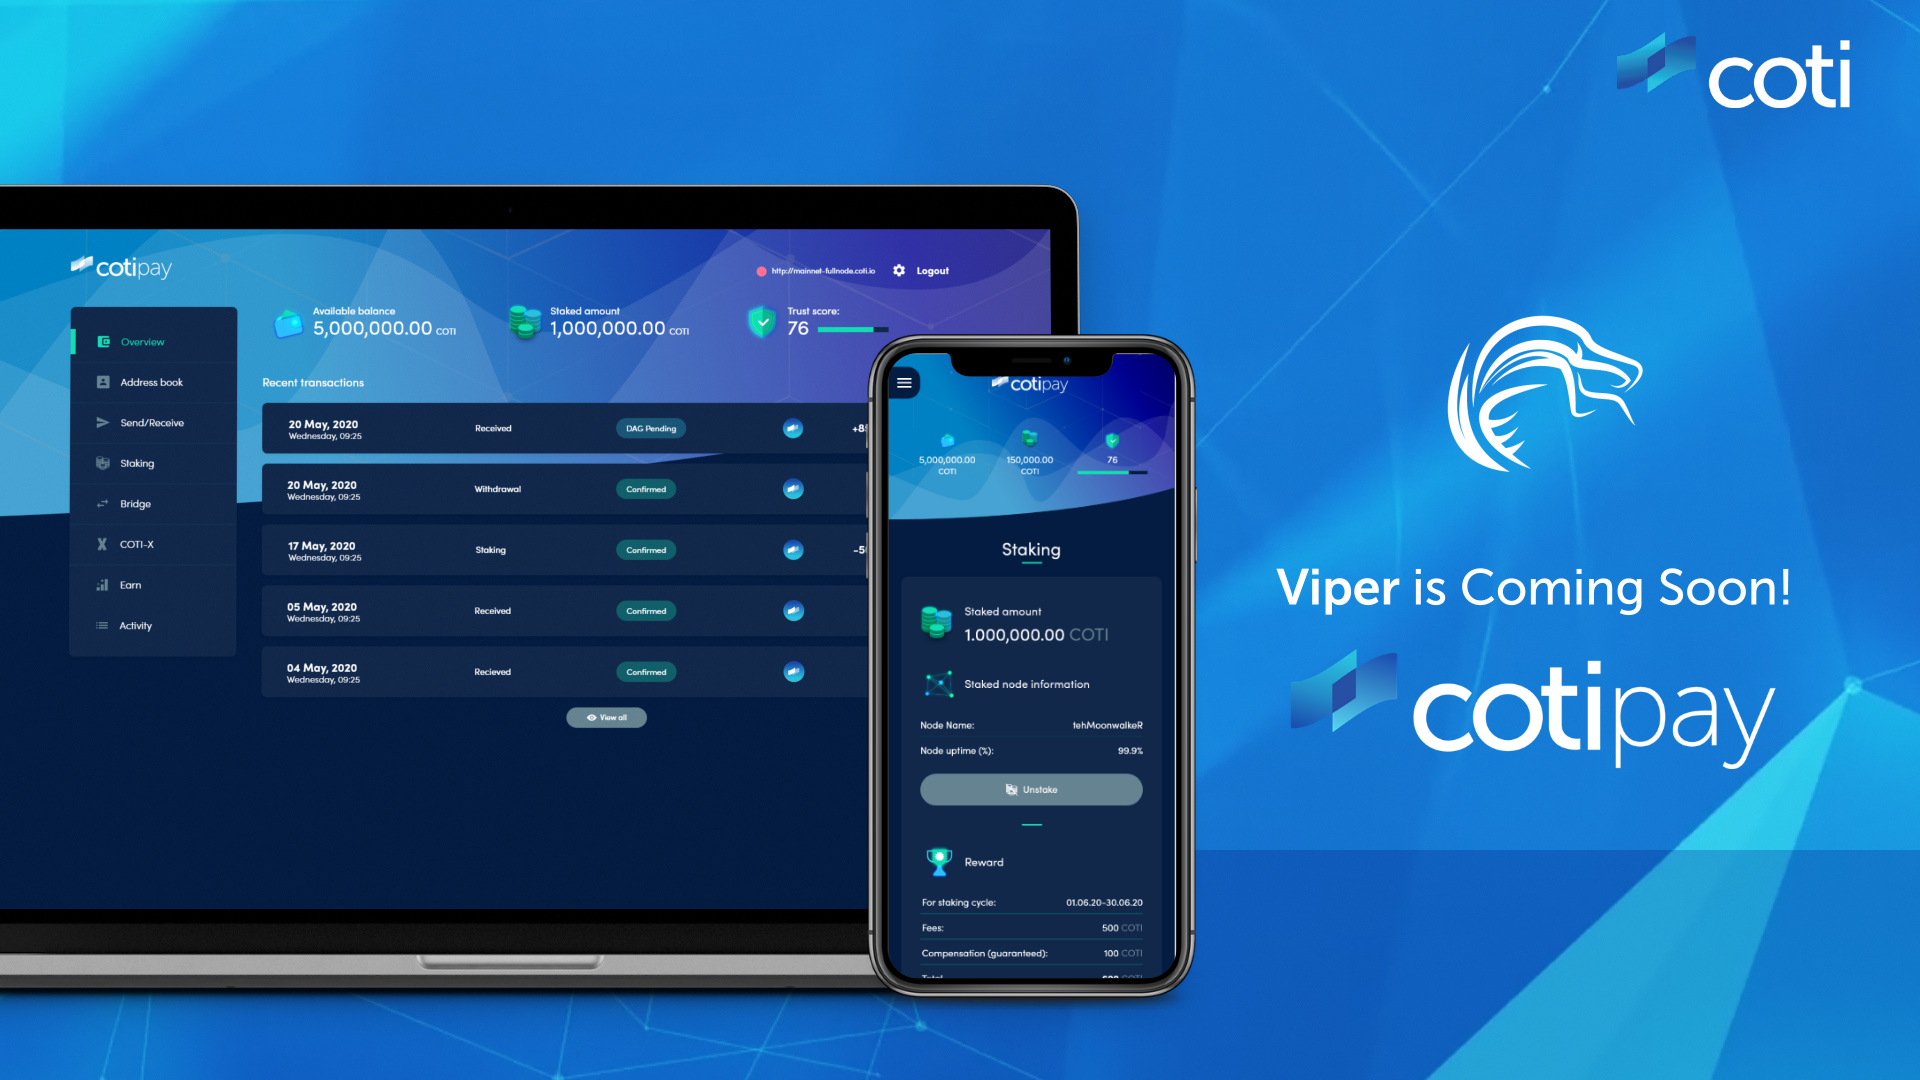 COTI Pay VIPER is coming — a Preview of the New Design ...